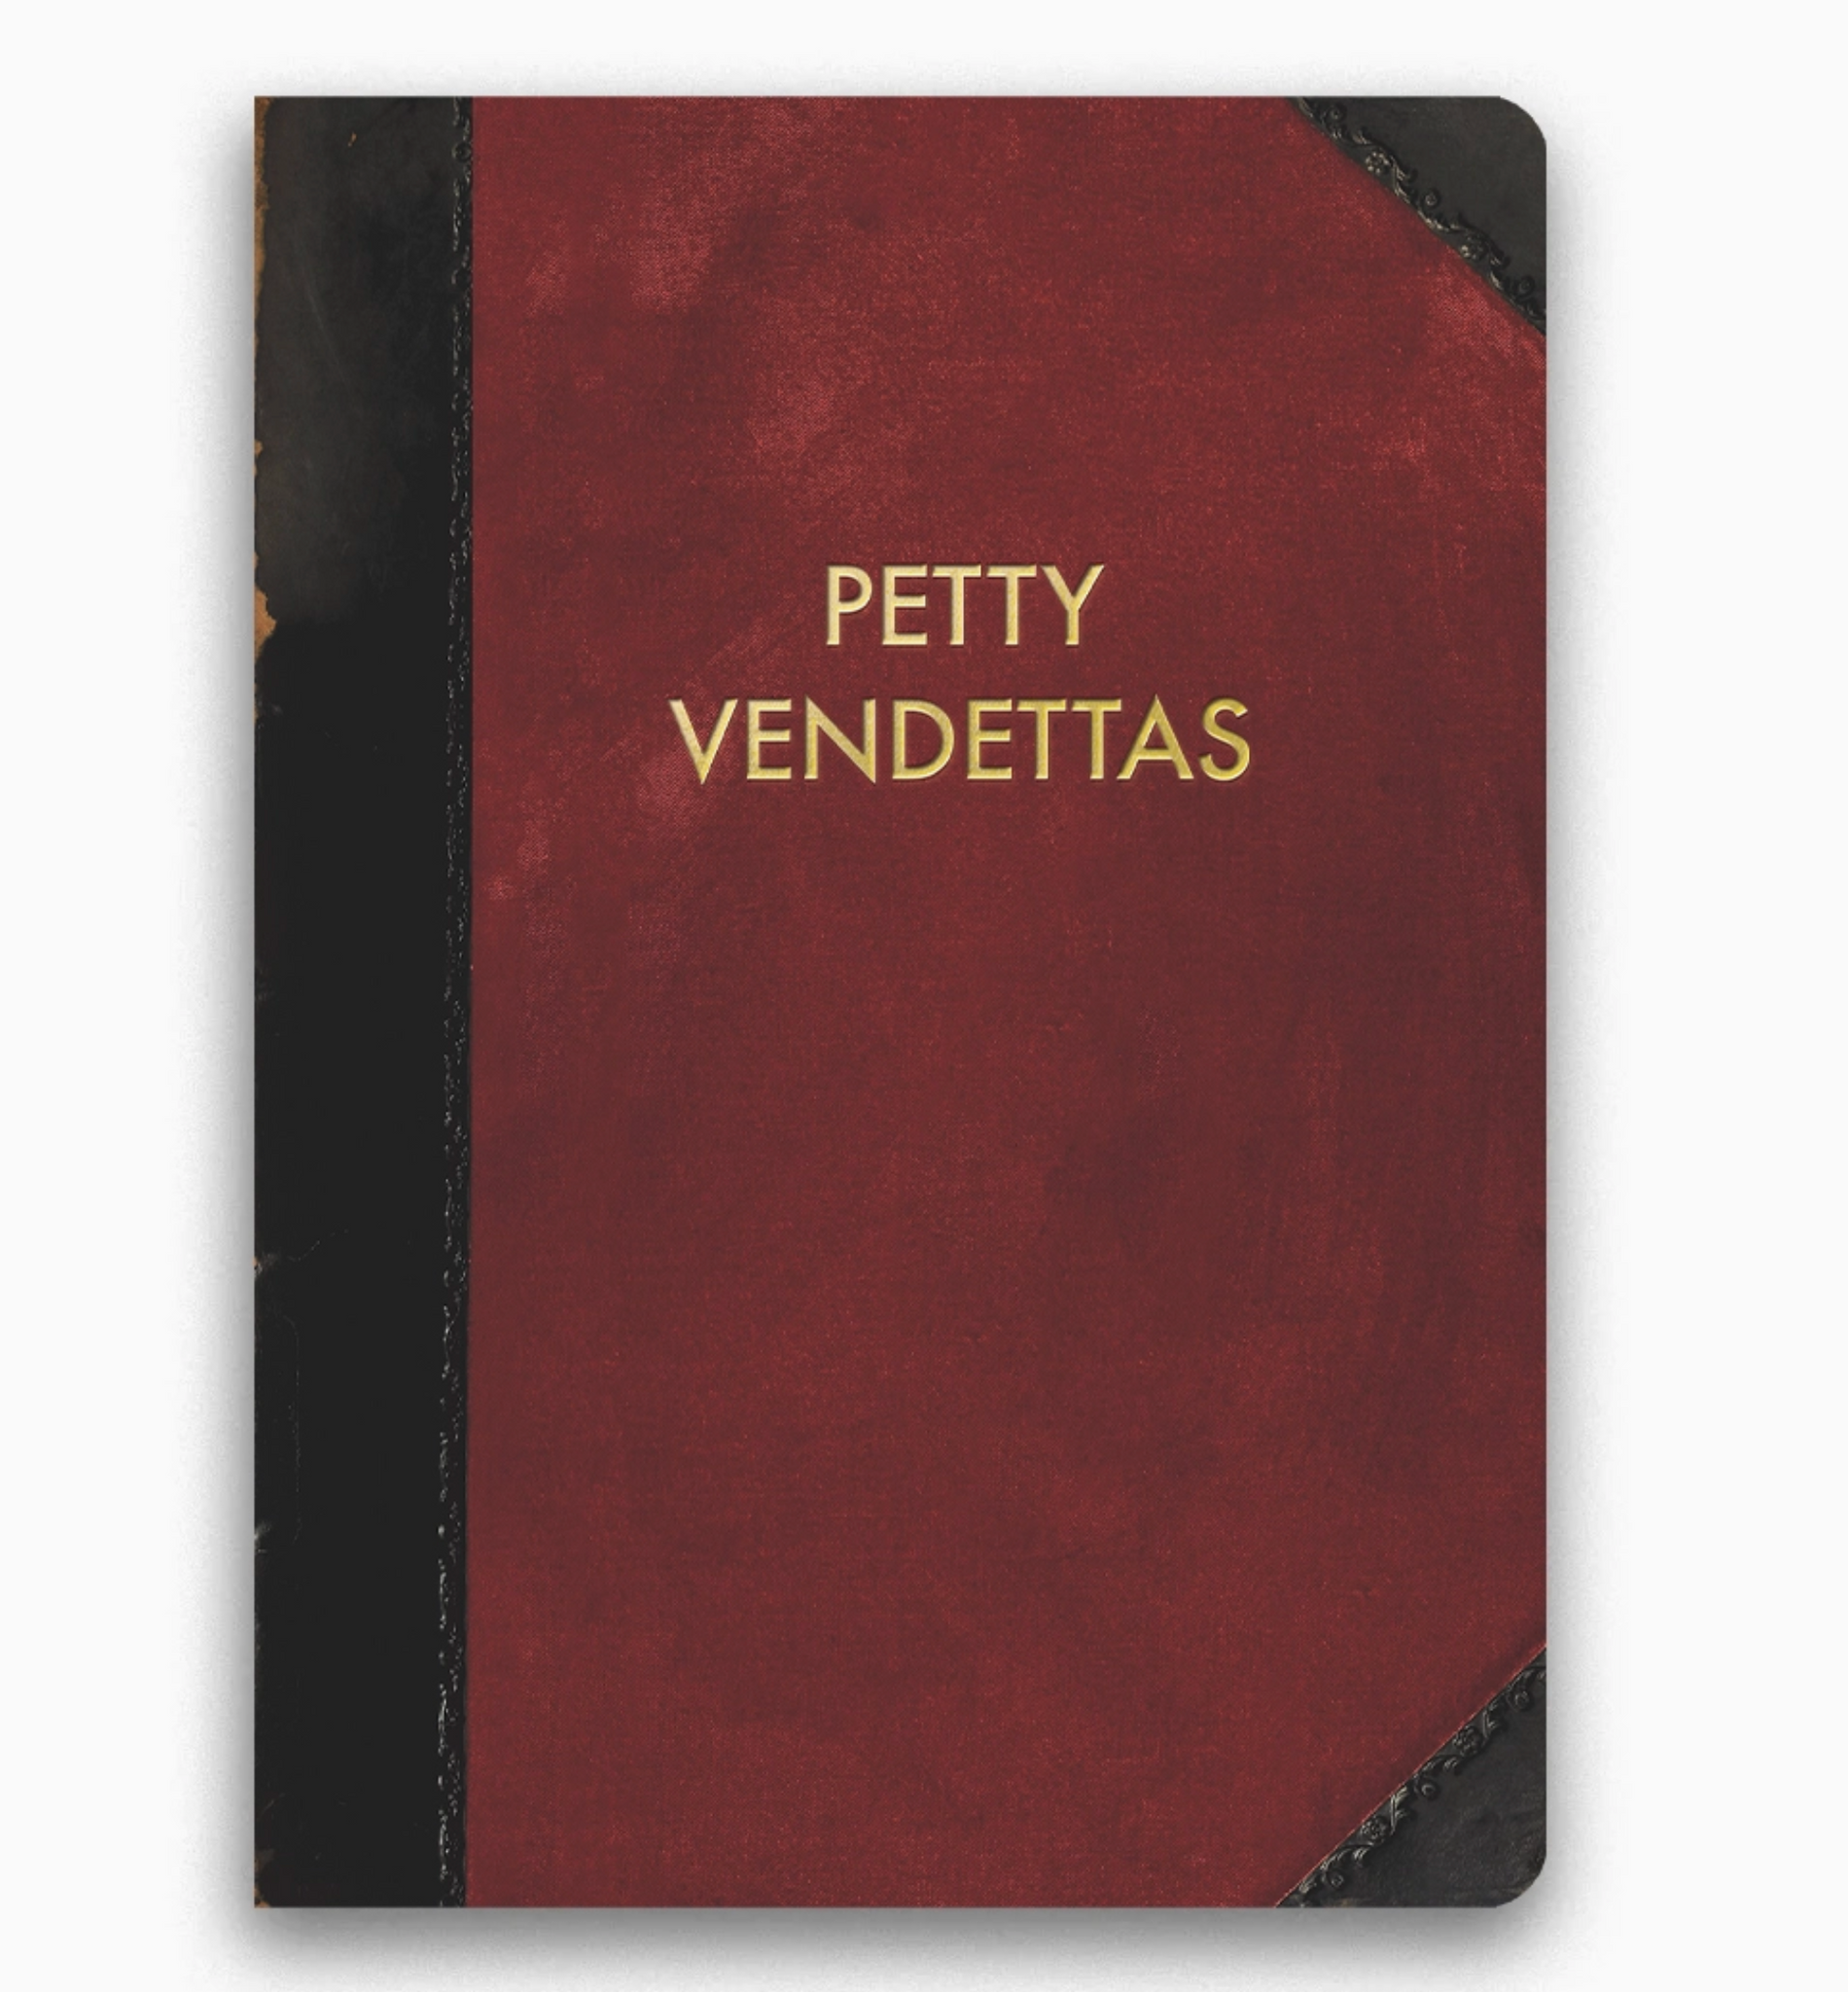 Vintage style petty vendettas notebook journal by The Mincing Mockingbird Sold by Le Monkey House